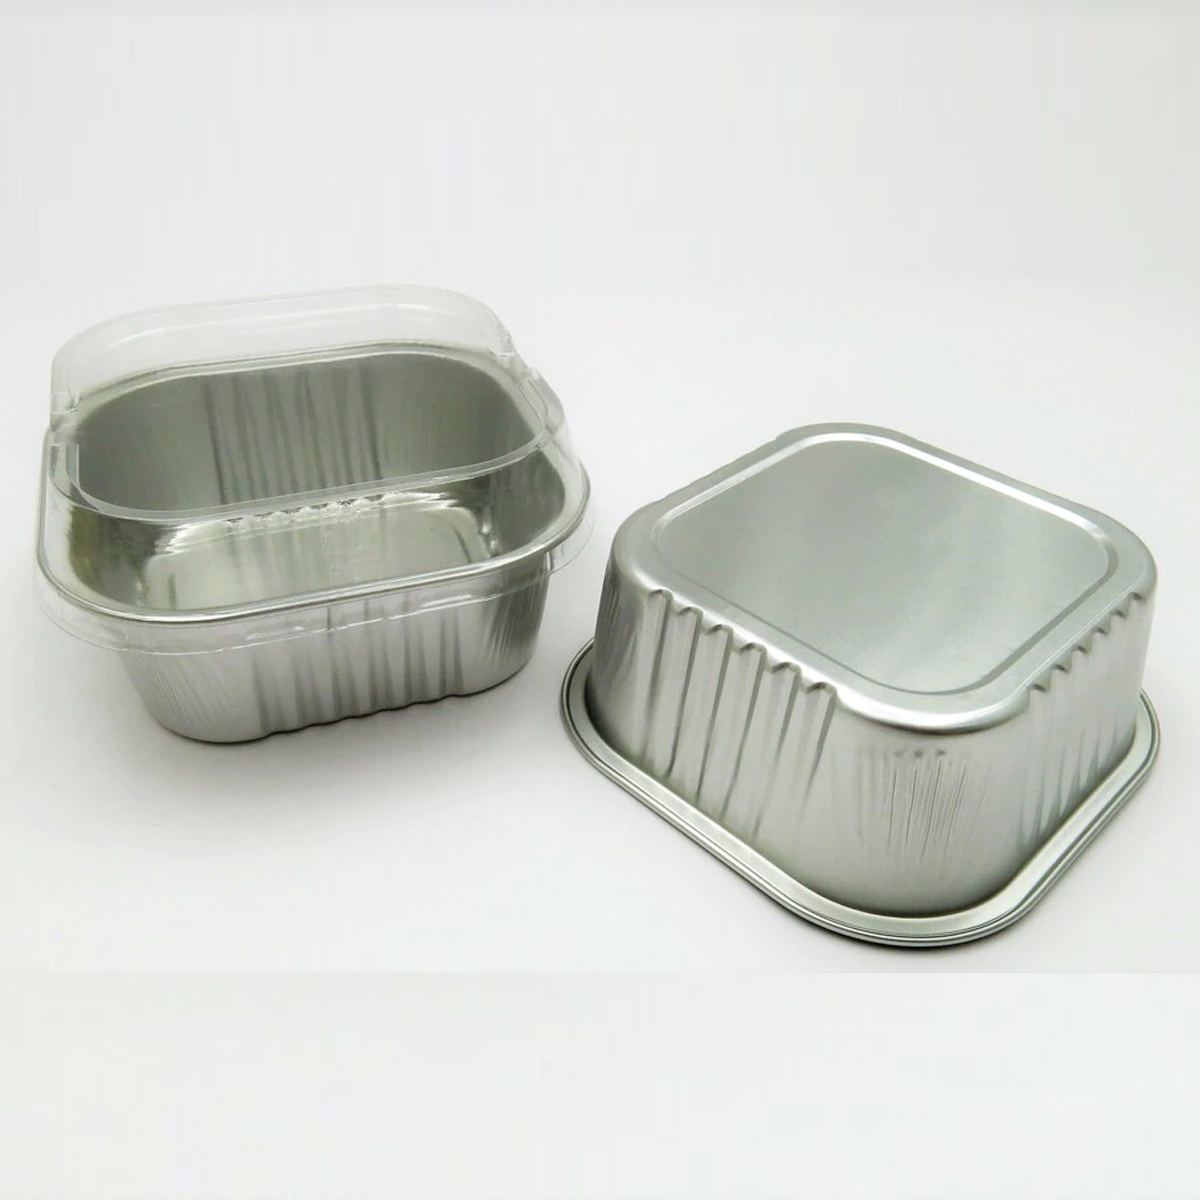 25Pcs Square Foil Cup with Snap-on Plastic Lids (9x2.5Cms) Silver - WILLOW